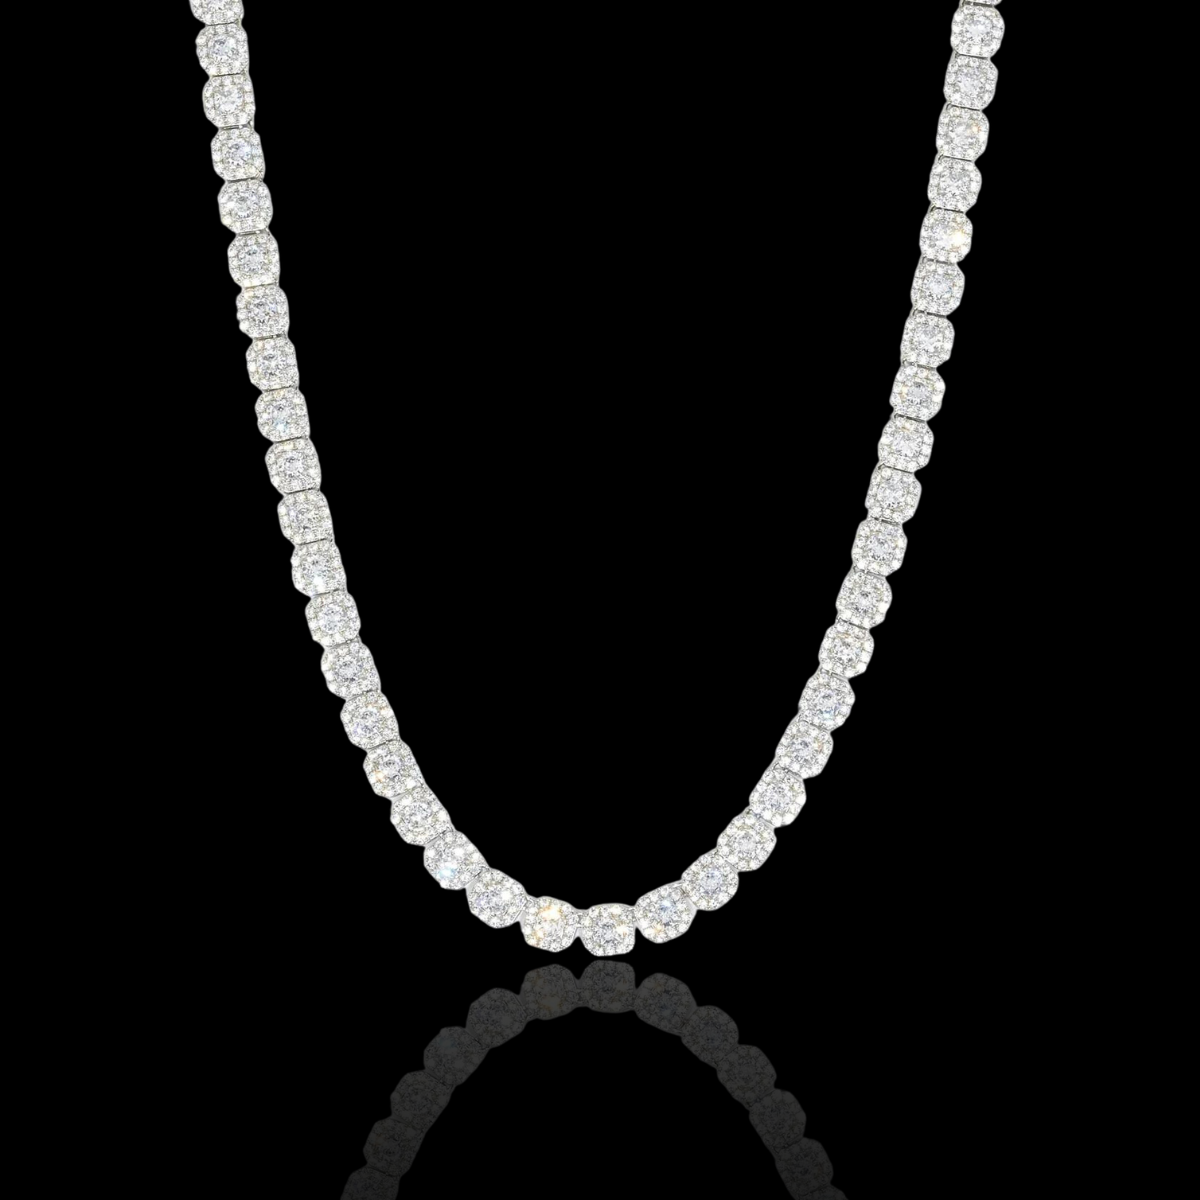 11mm Clustered Tennis Chain White Gold Necklace – FunkyFrost